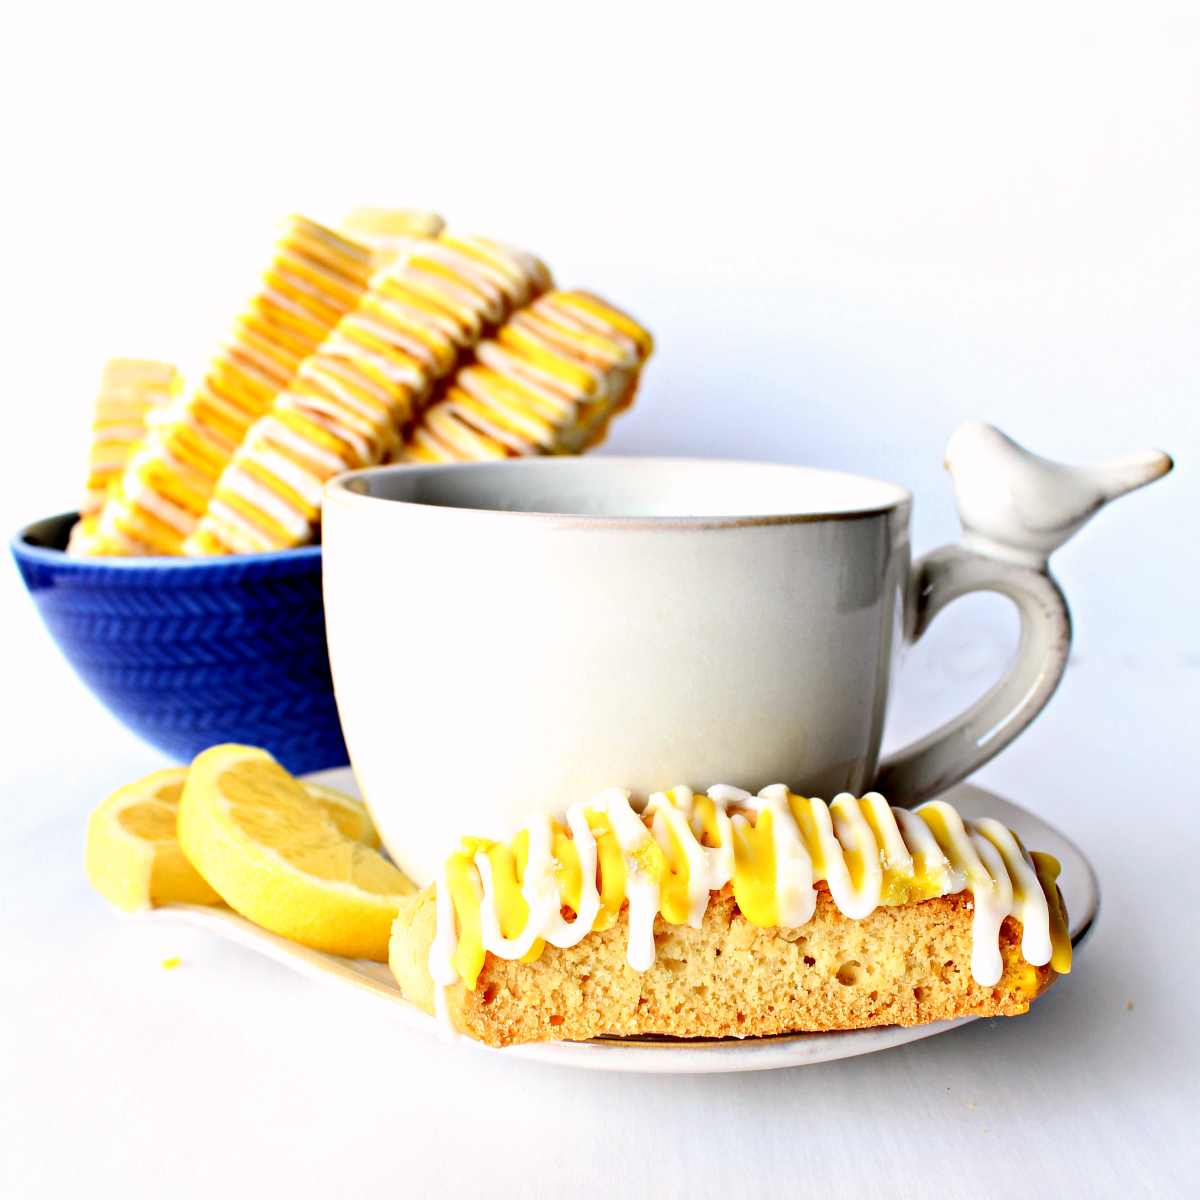 Lemon Biscotti with a cup of tea.